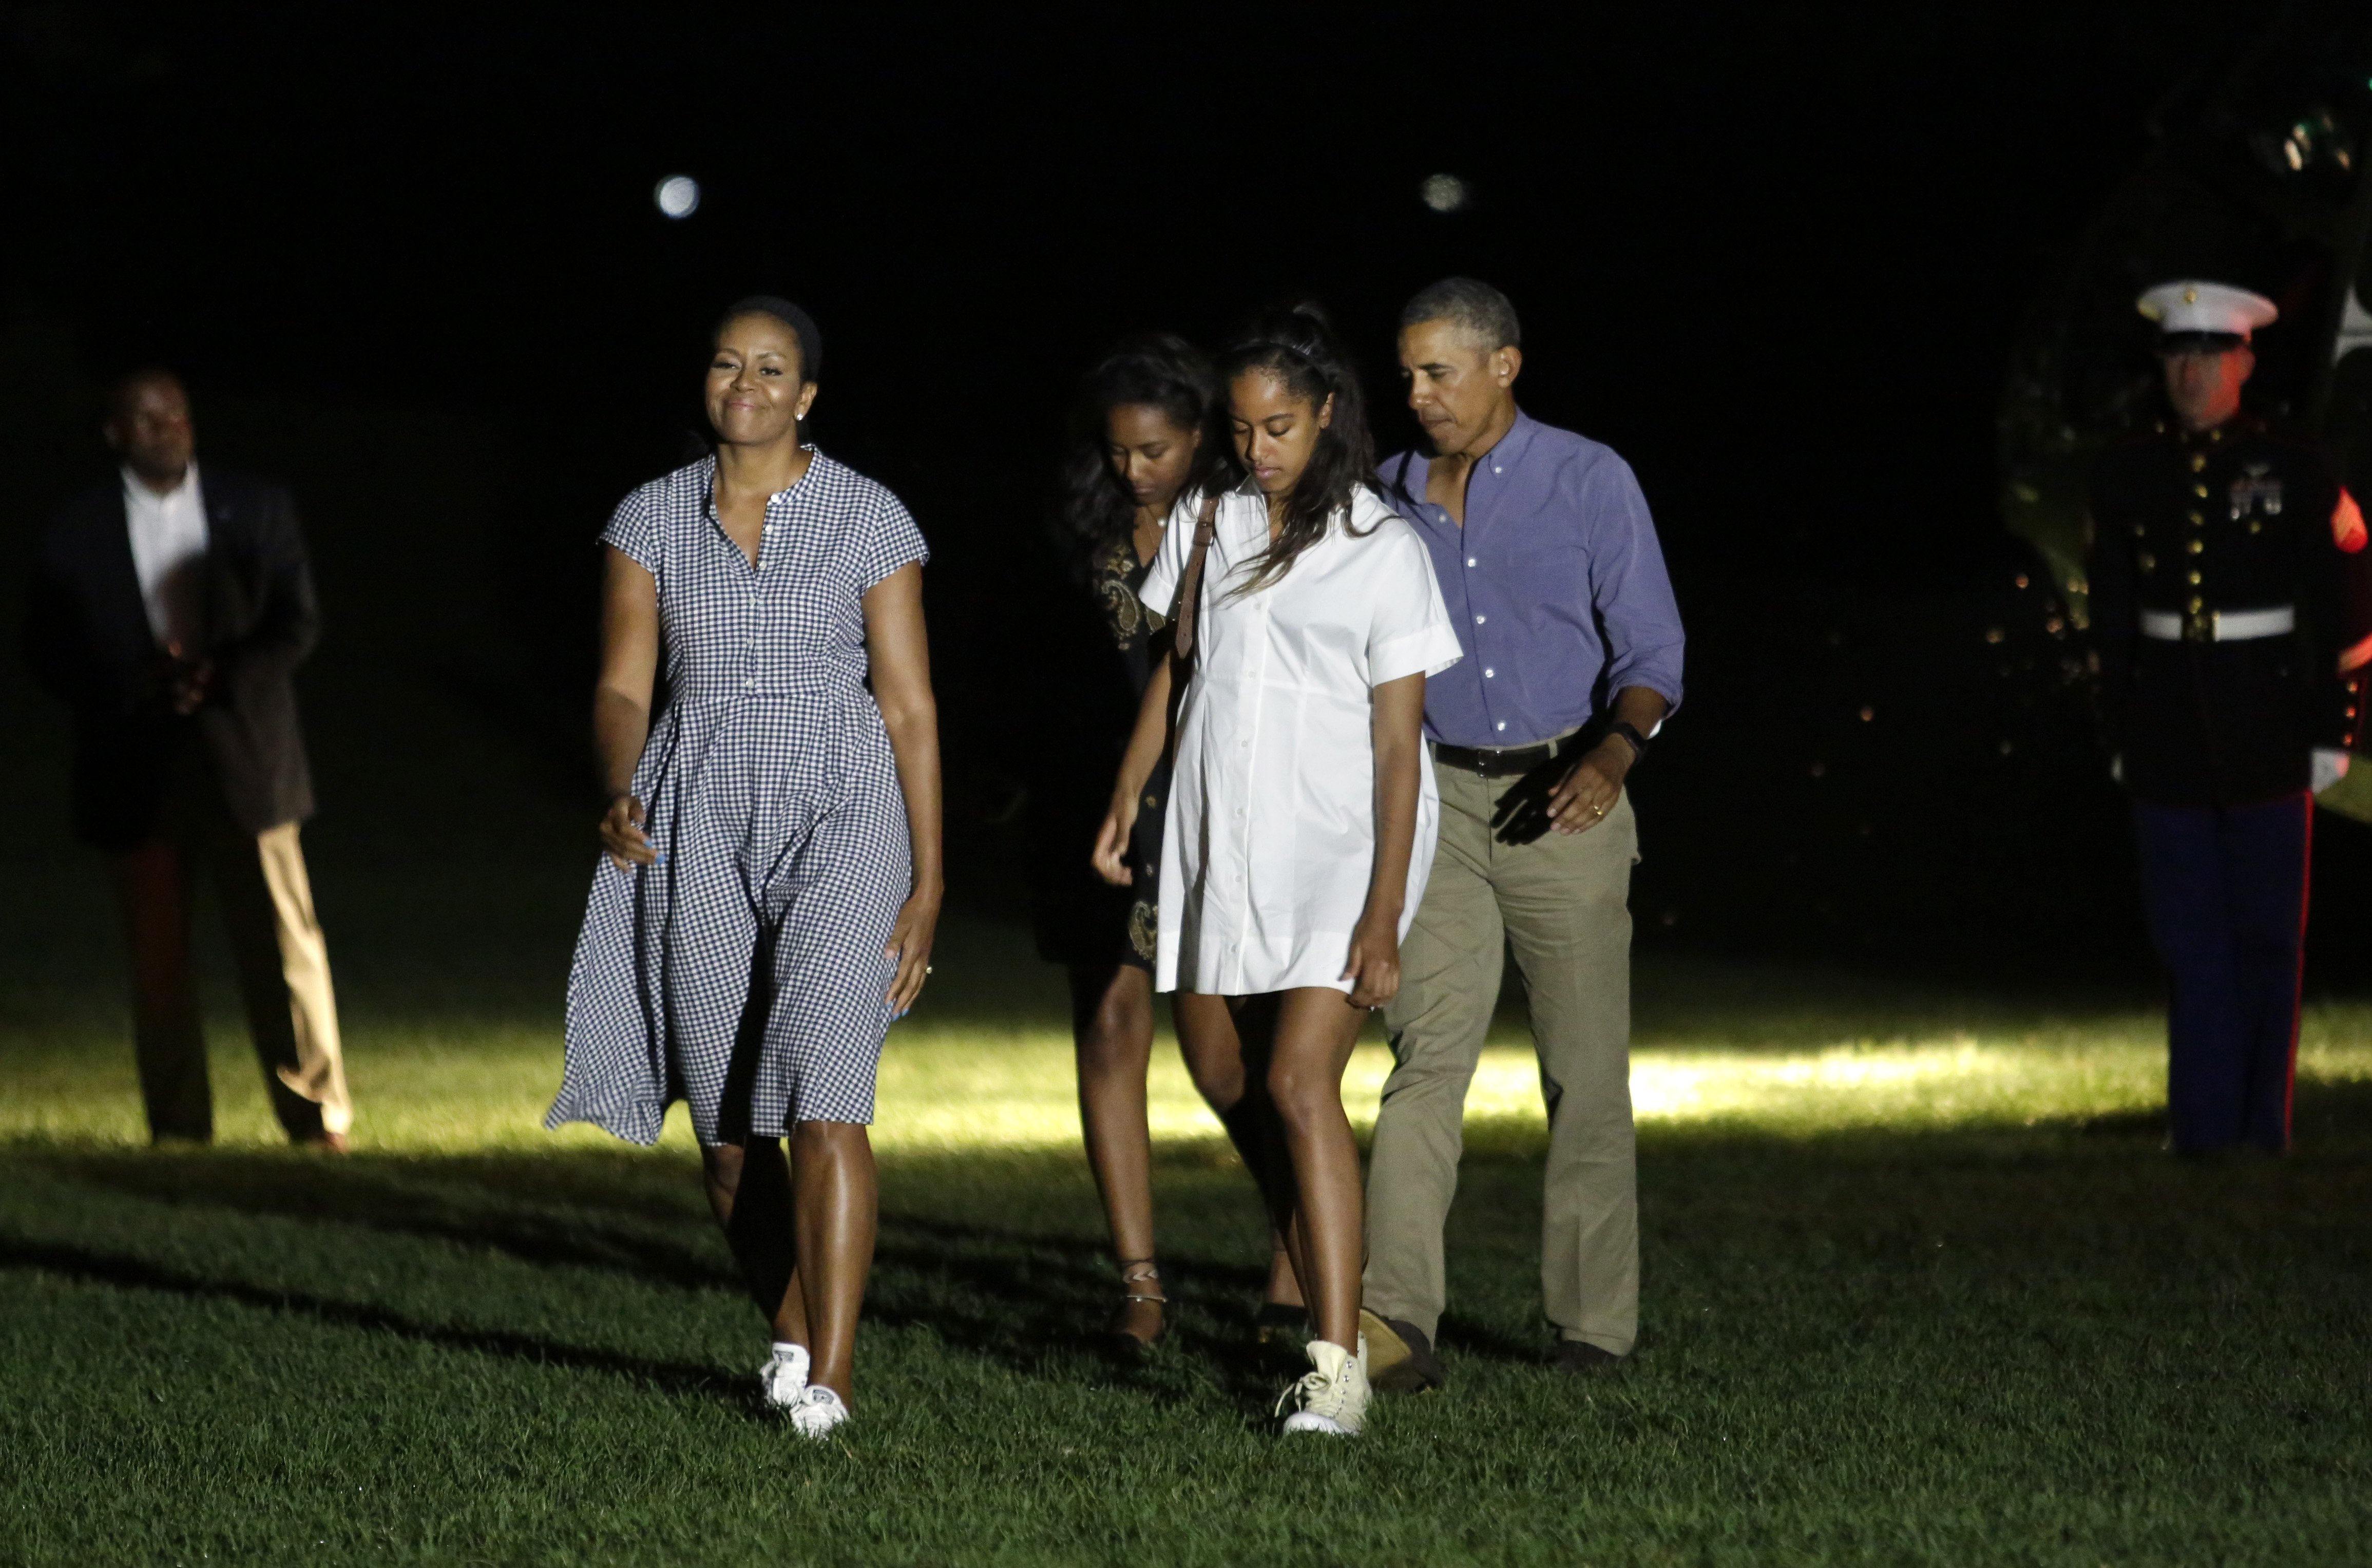 Barack Obama waves as he walks with First lady Michelle Obama and their daughters Malia and Sasha on the South Lawn of the White House in Washington upon their return from a summer vacation in Martha's Vineyard, Massachusetts, on August 21, 2016. | Source: Getty Images